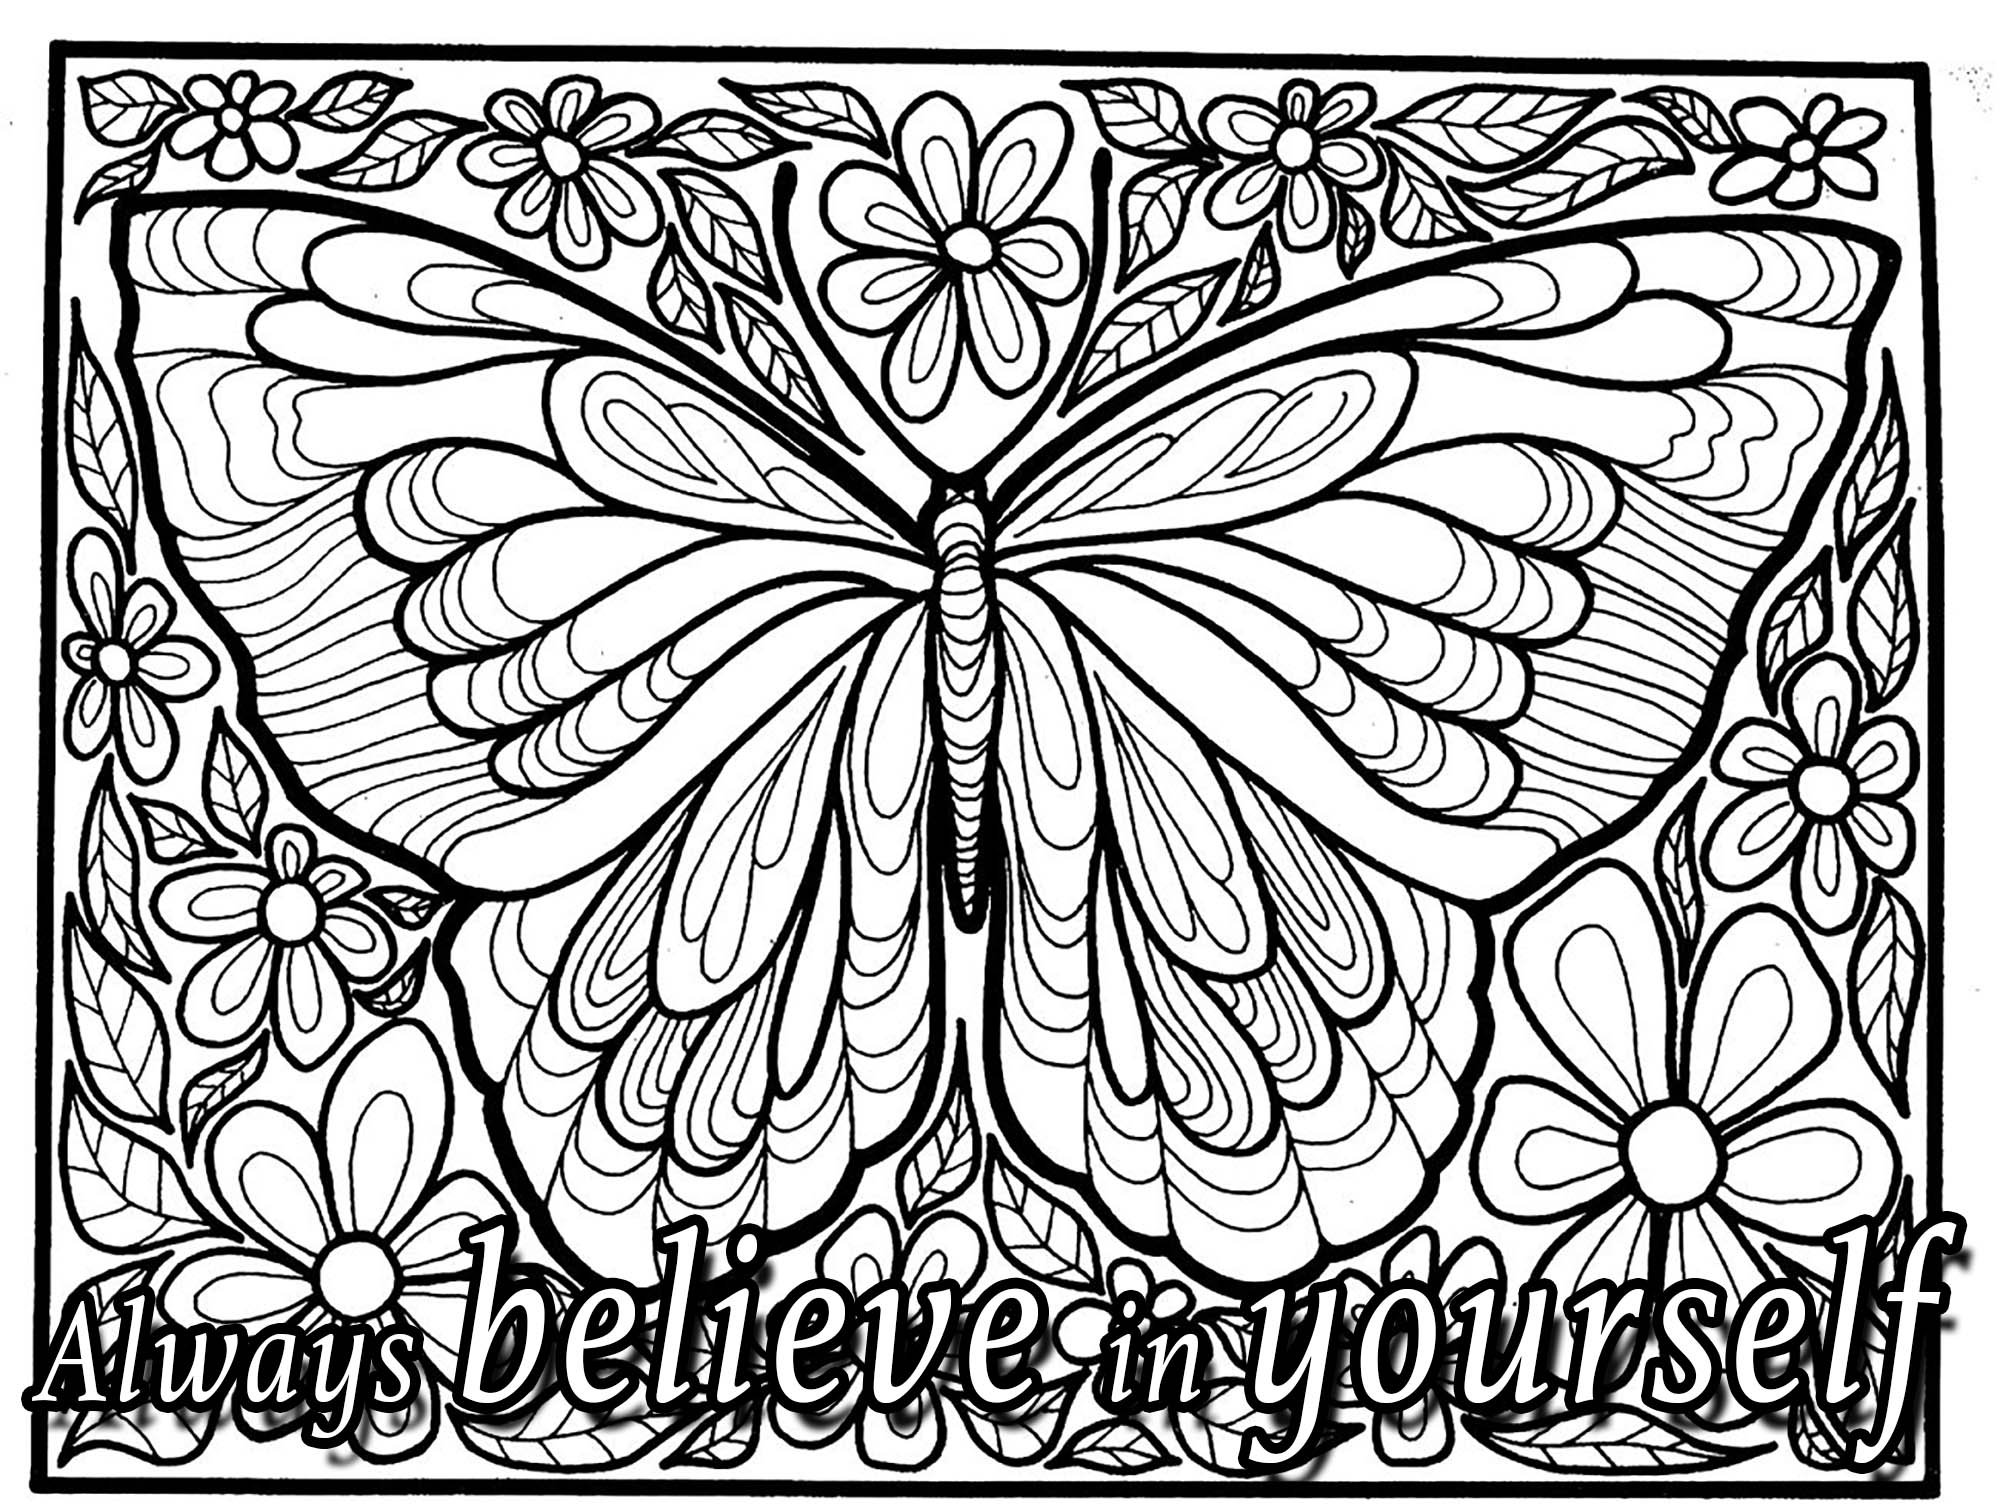 'Always believe in yourself' : Quote to color, with a butterfly in background